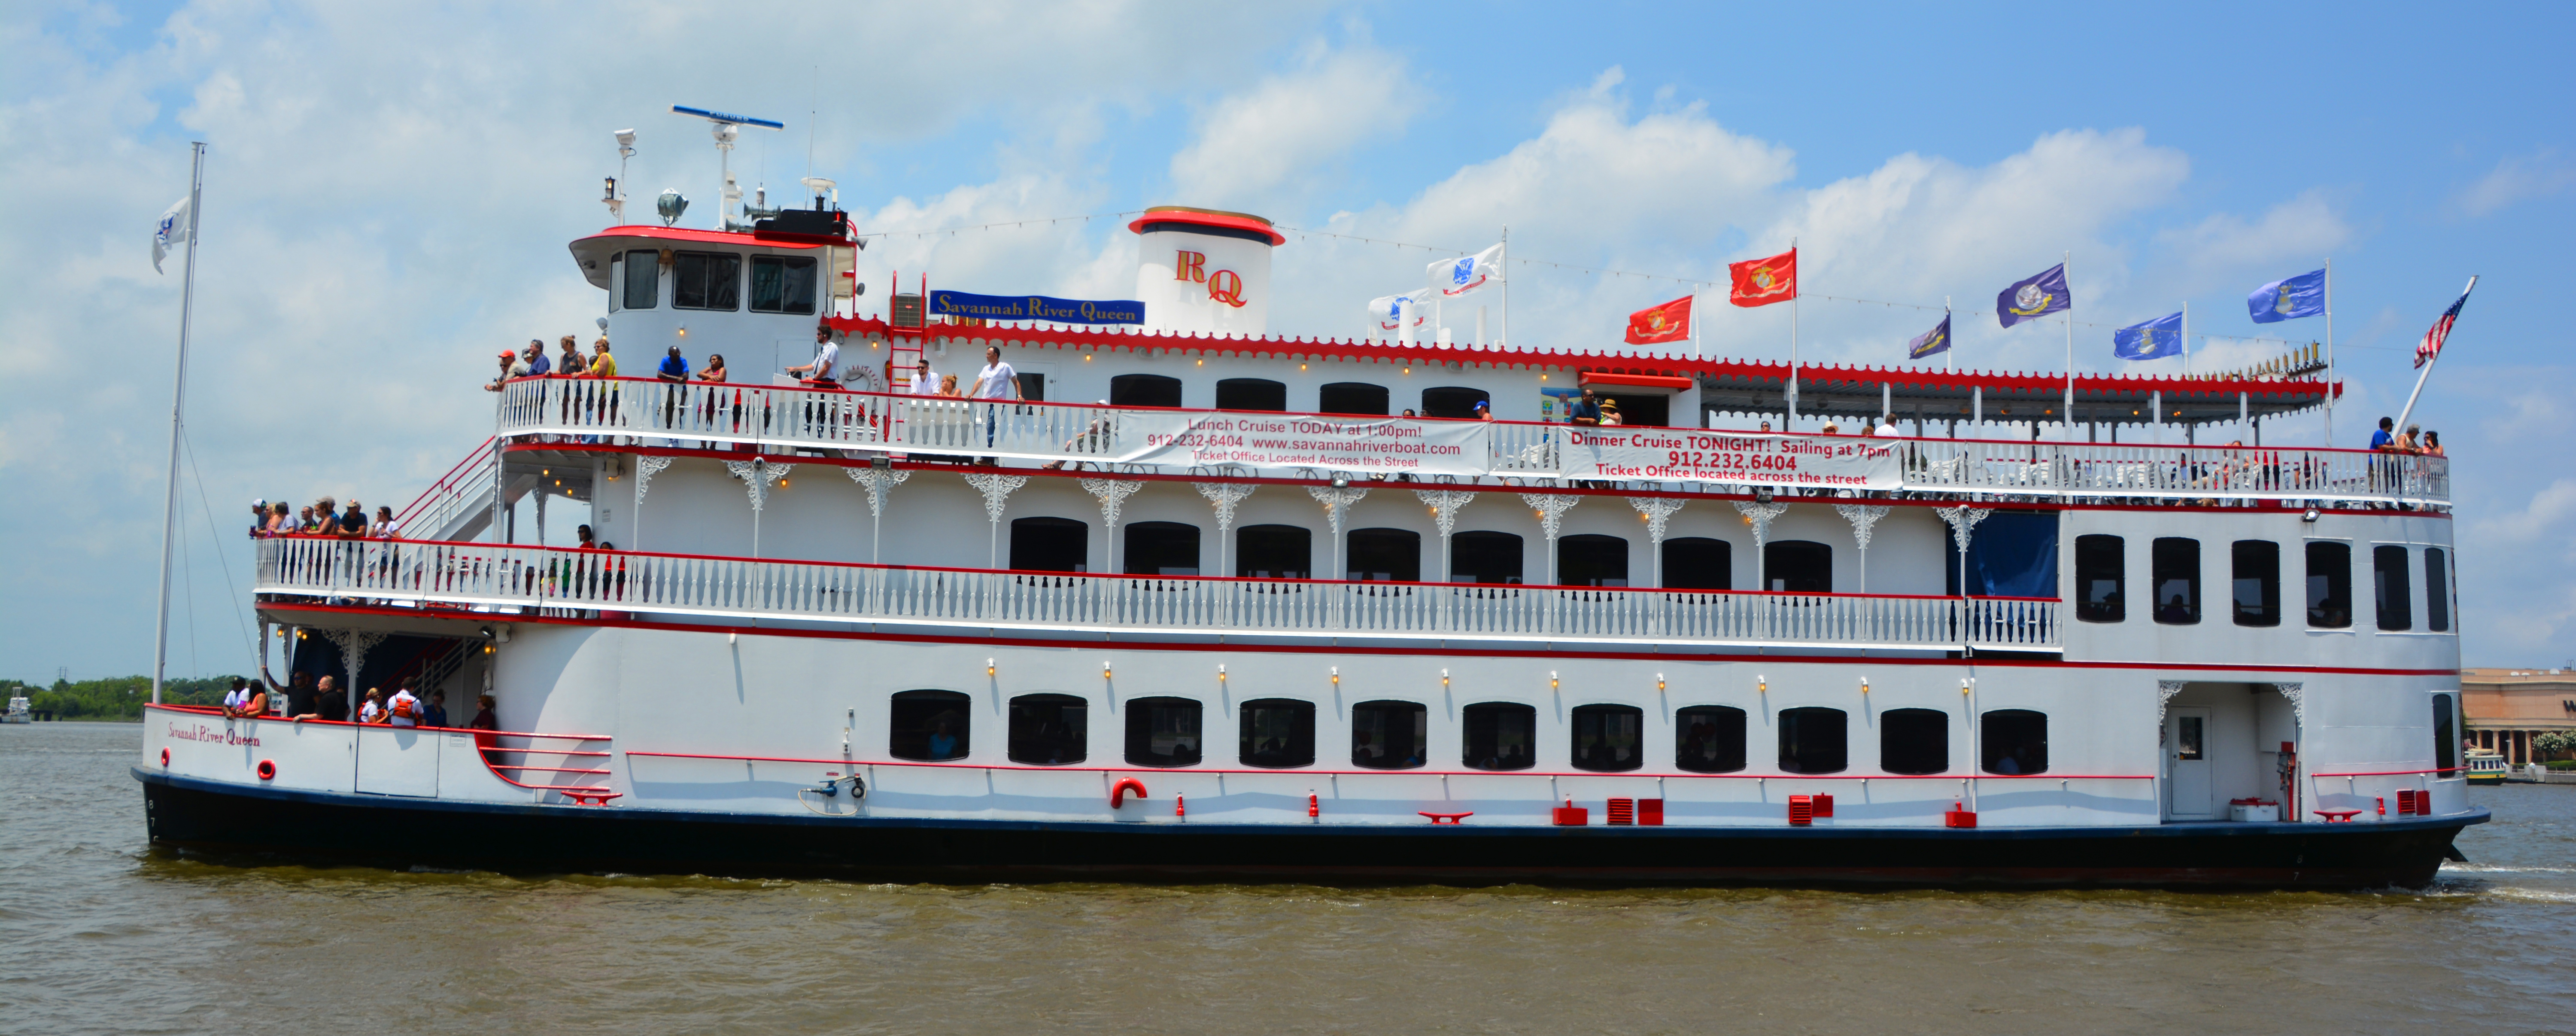 Best Family Destinations on the Southeast Coast - Savannah Riverboat